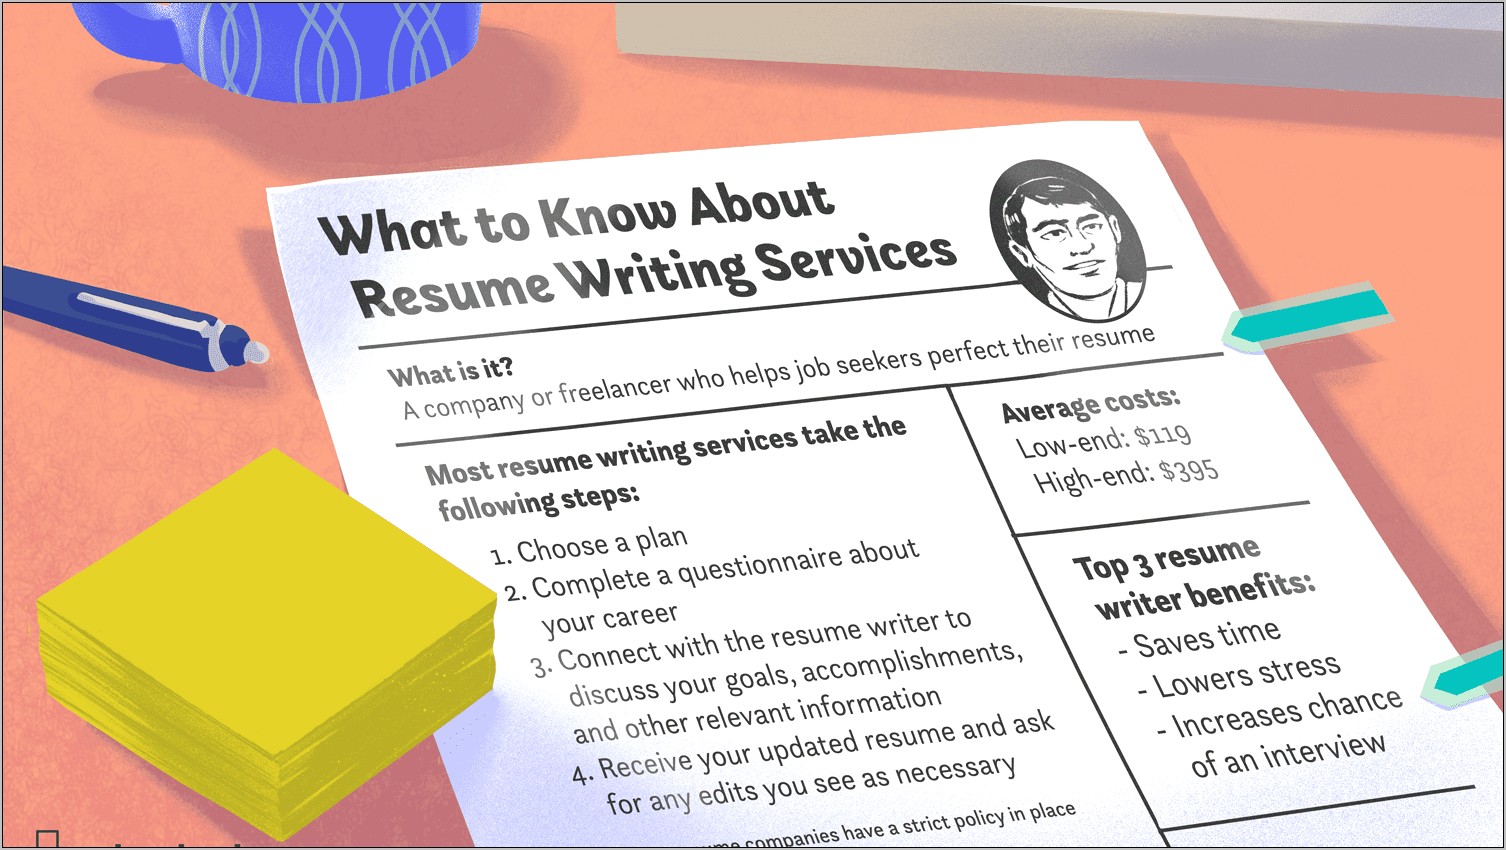 Resume Writing After Having A Job Already